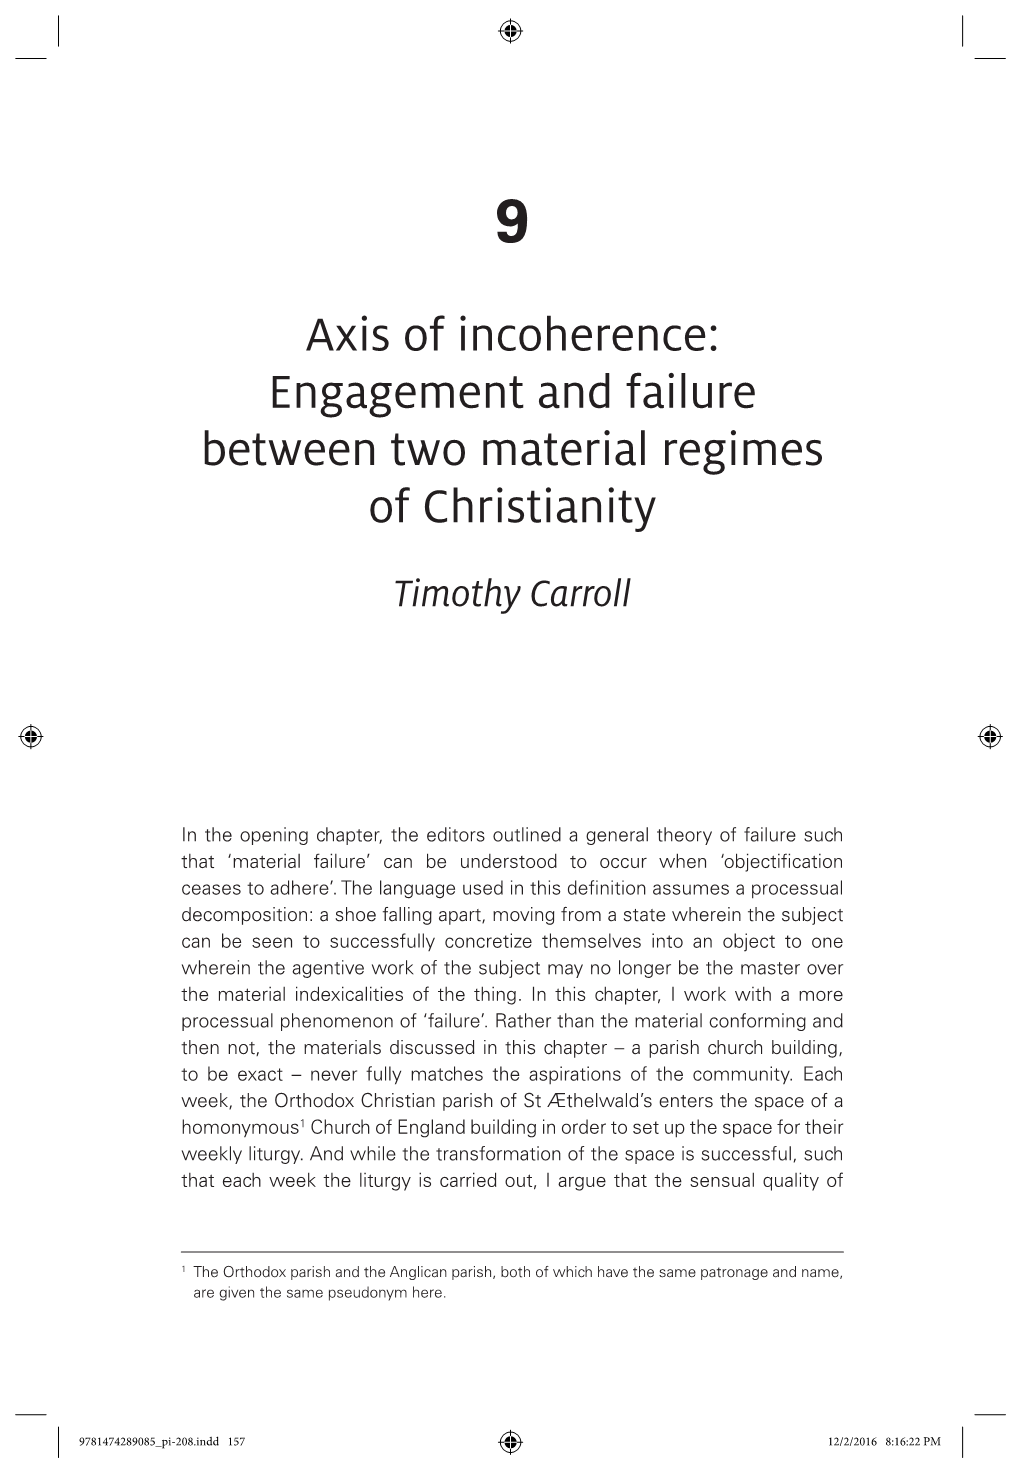 Axis of Incoherence: Engagement and Failure Between Two Material Regimes